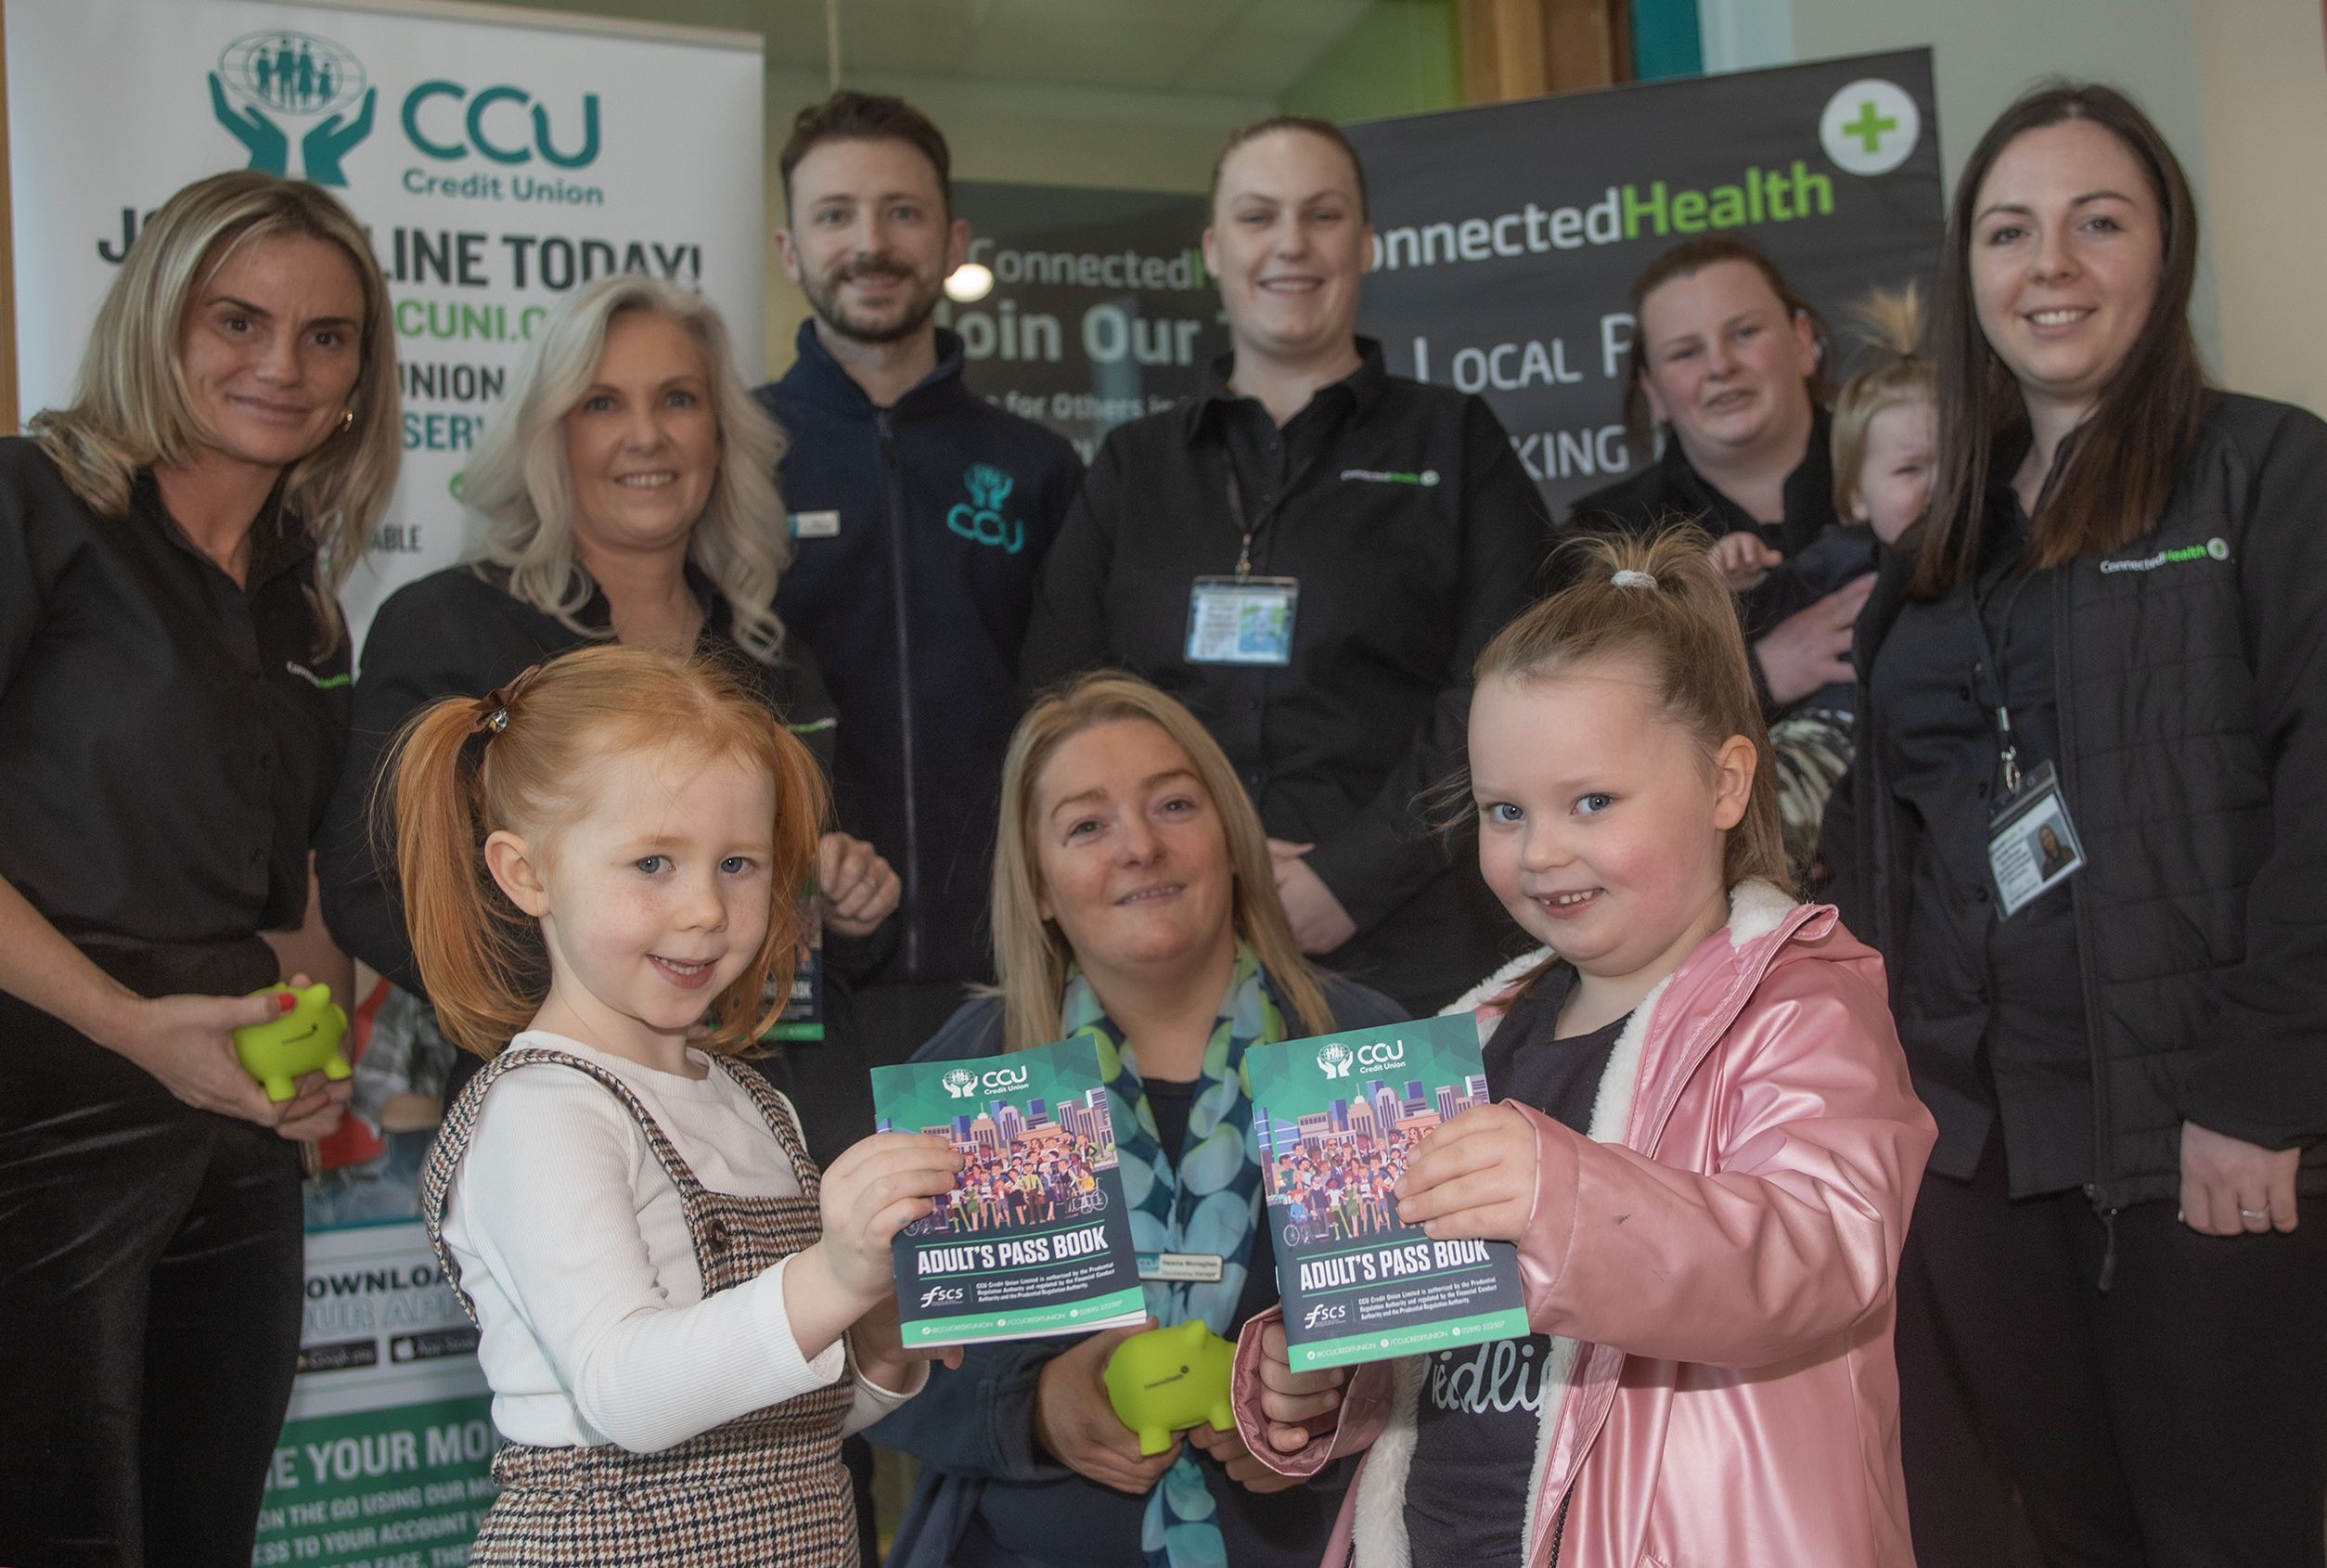 TOGETHER: Connected Health and Clonard Credit Union